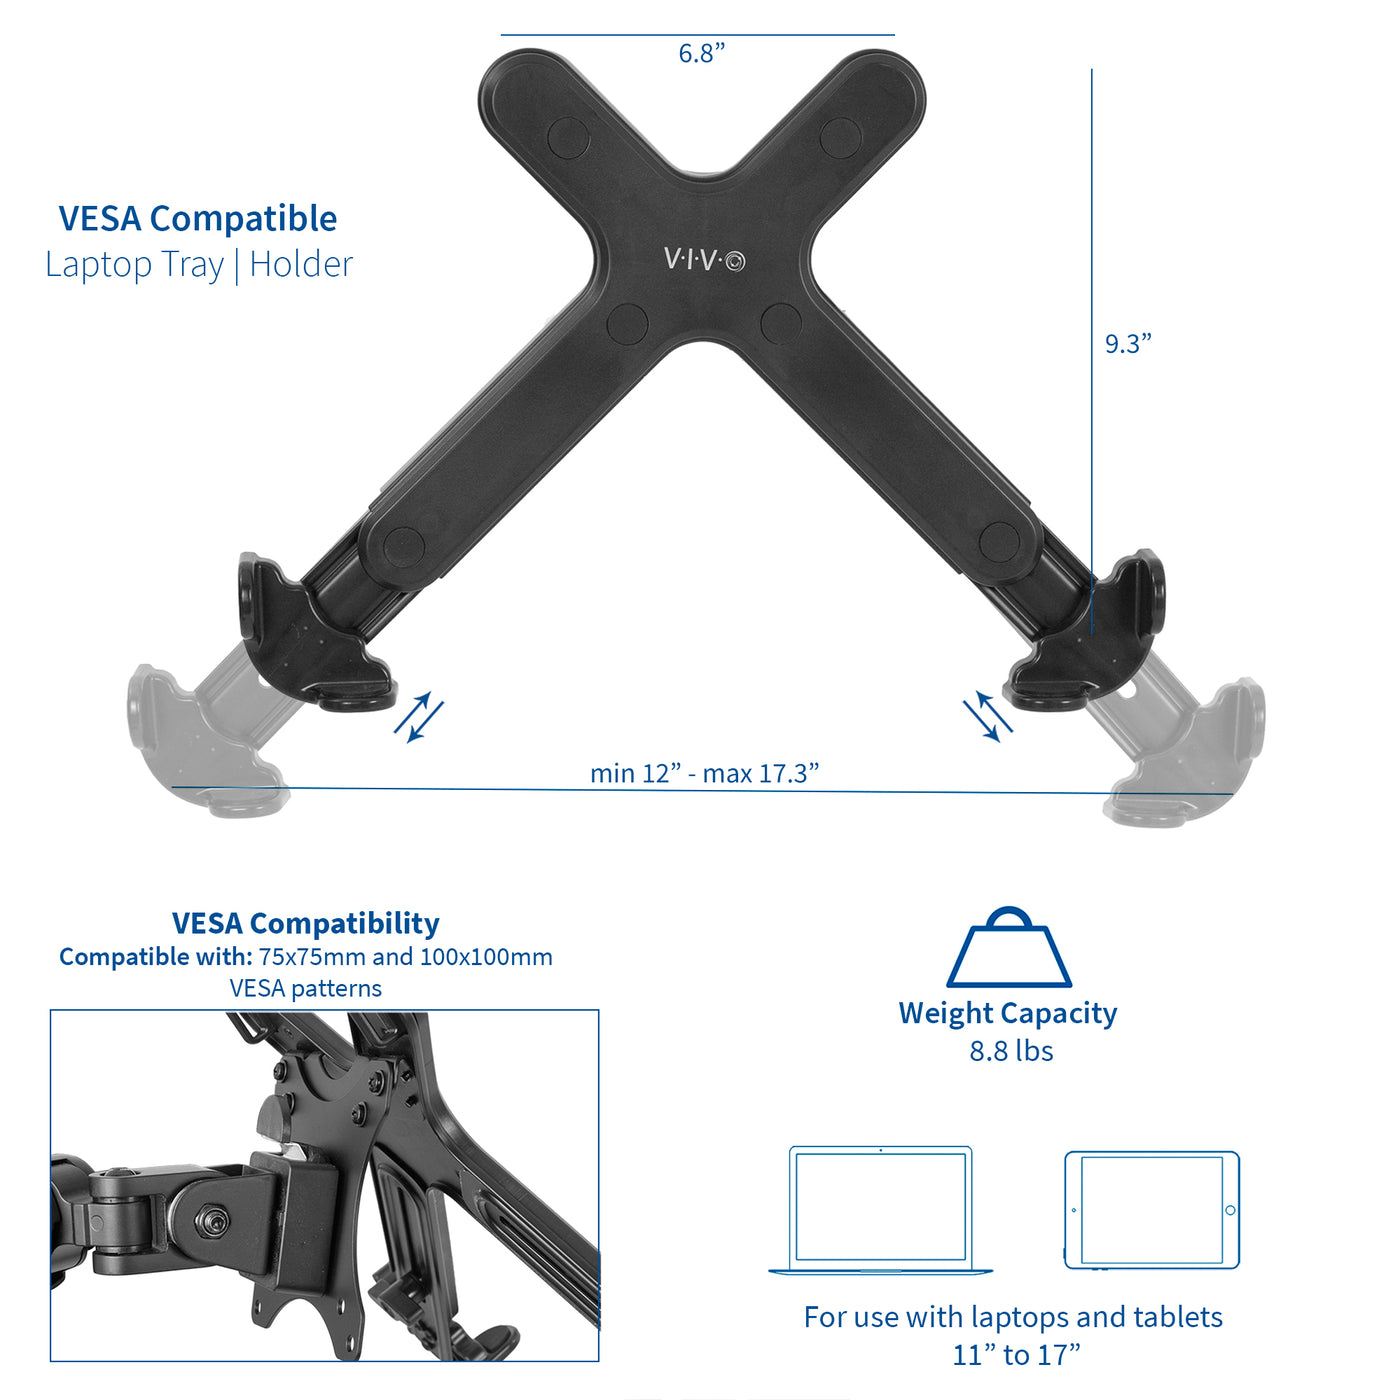 Heavy-duty VESA compatible laptop holder for tablets and laptops.